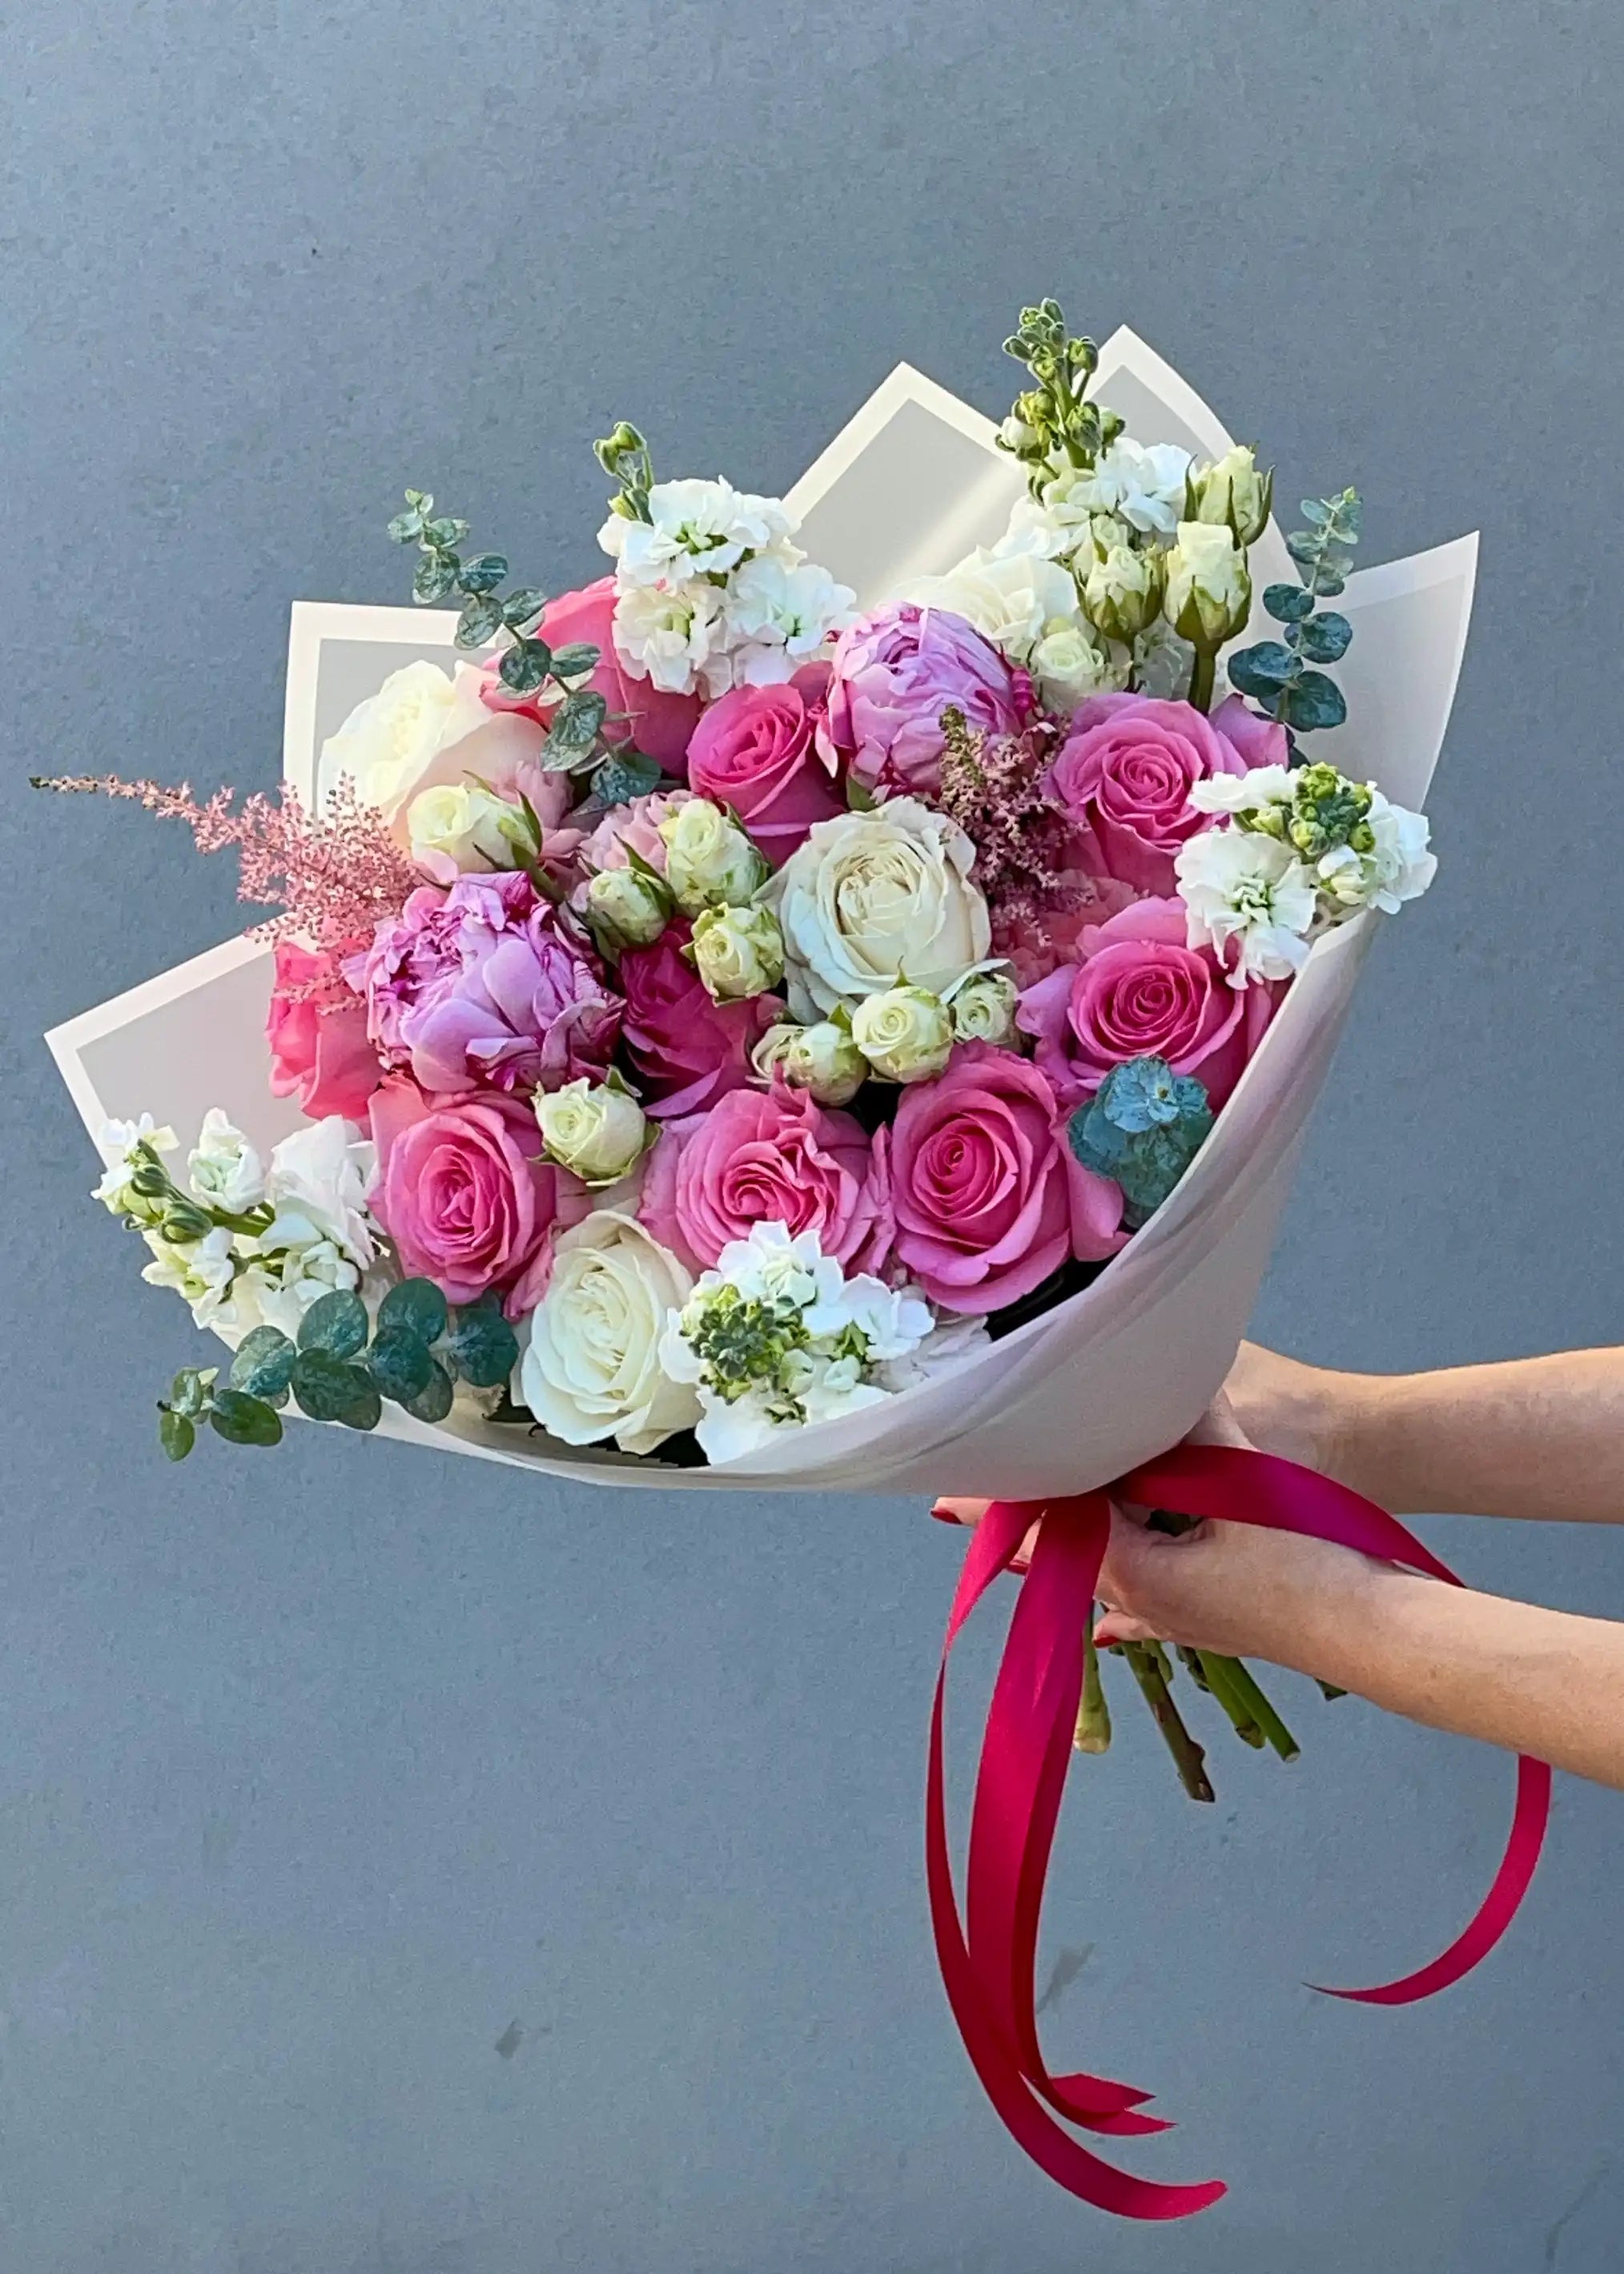 NO. 123. Pink Tenderness Bouquet (peonies, roses, matthiolas, astilbe)